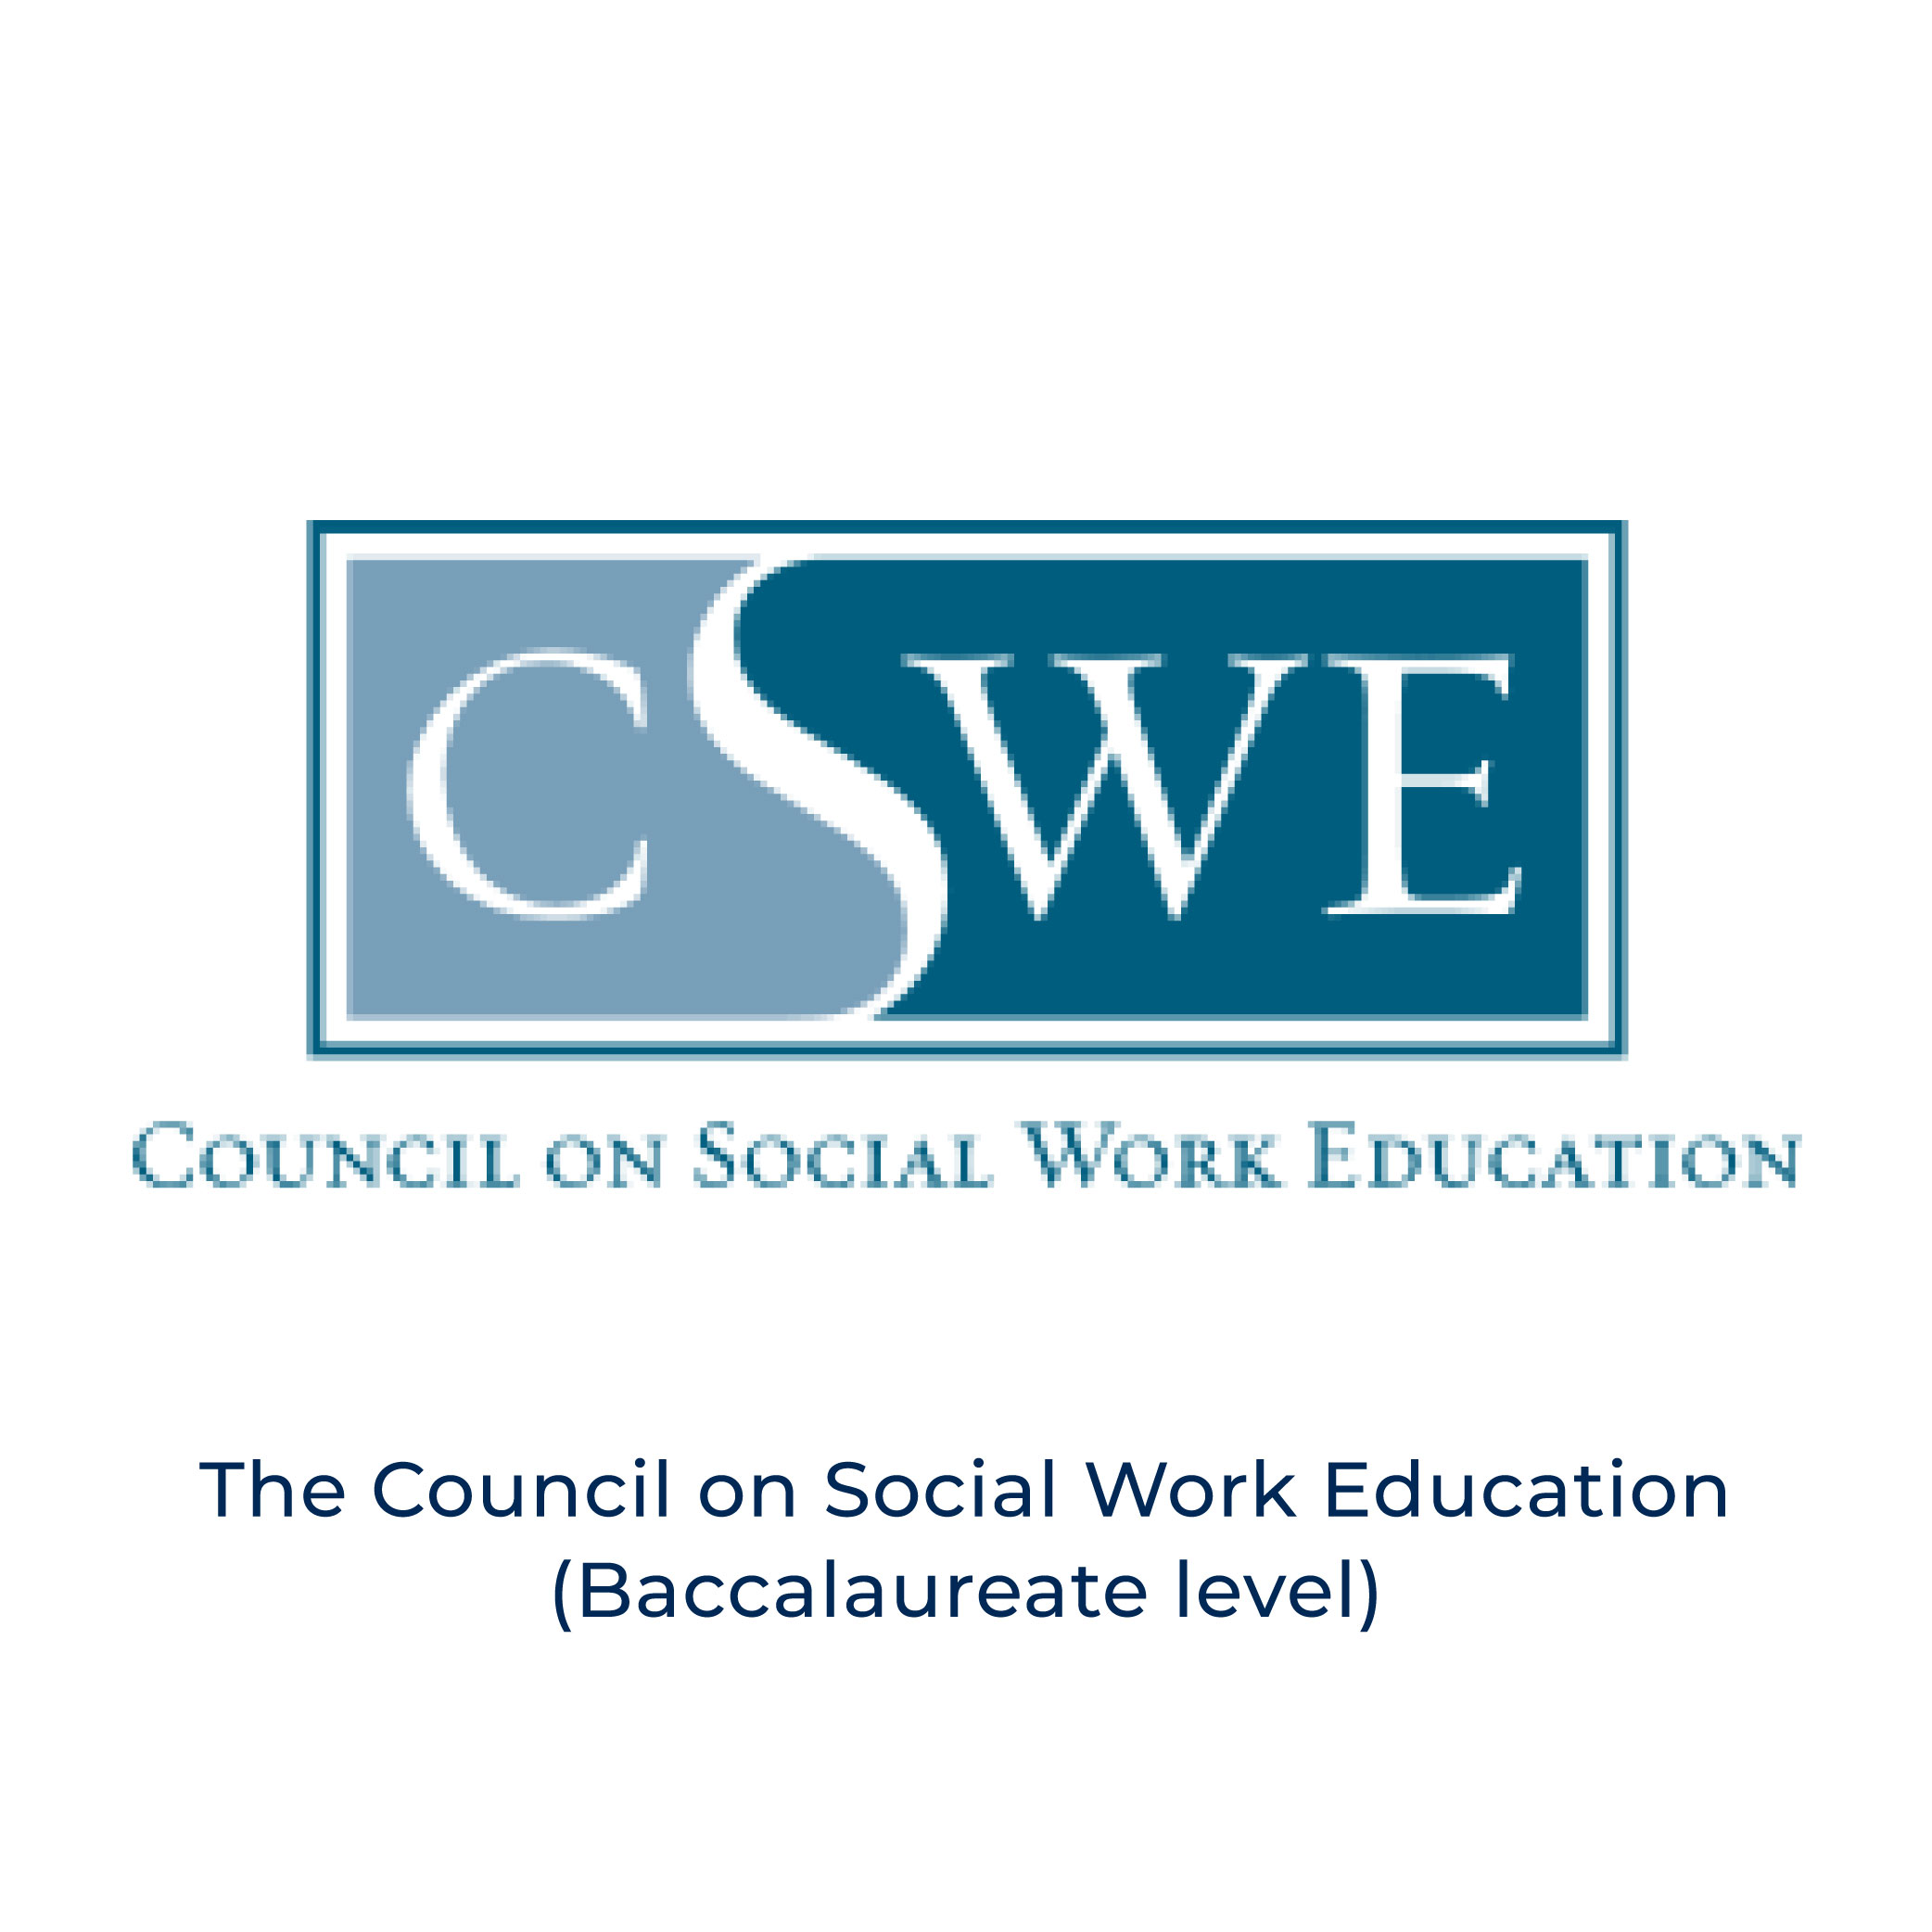 The Council on Social Work Education (Baccalaureate level)